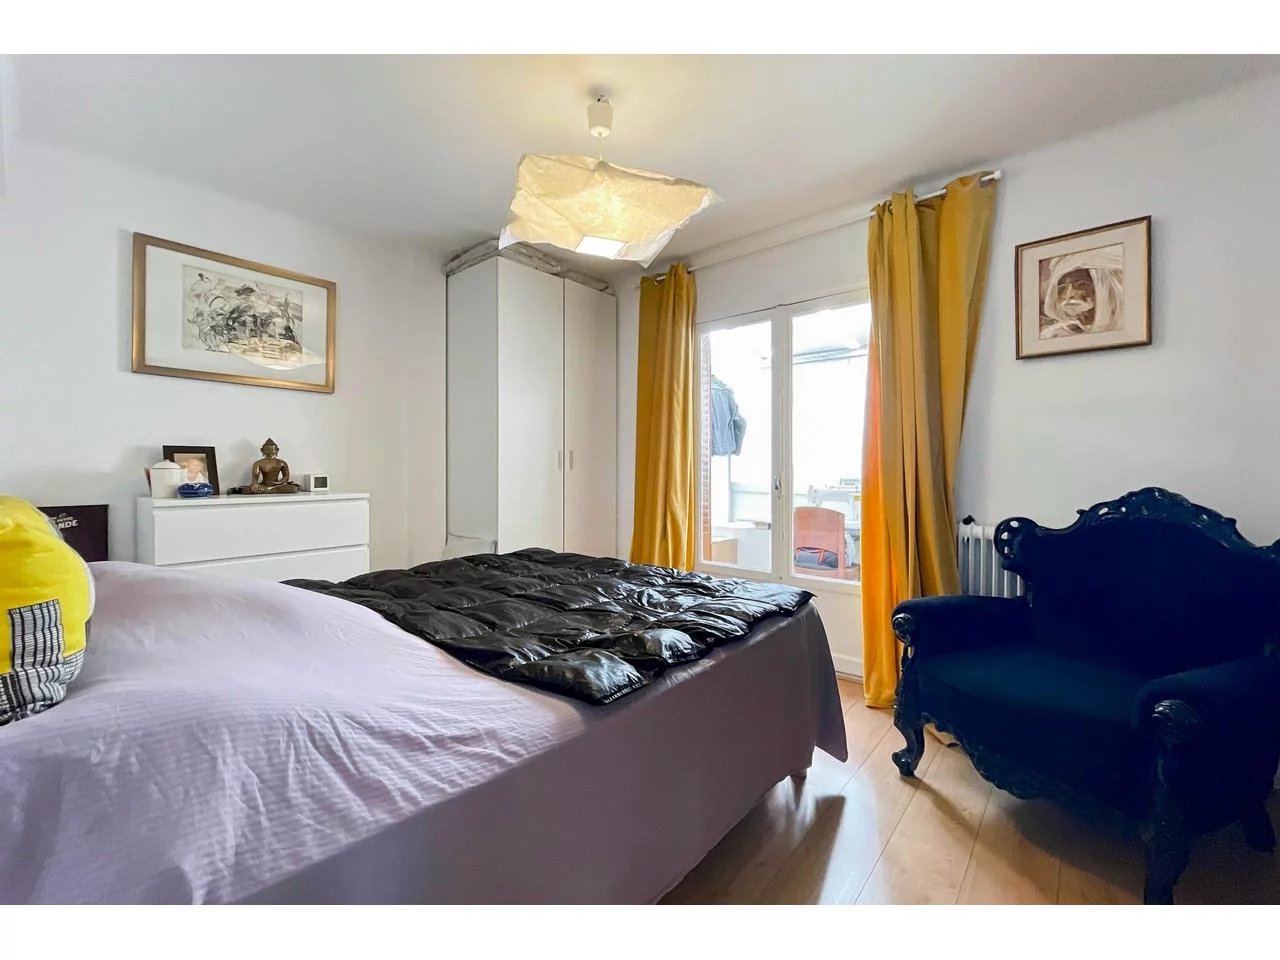 Appartement  3 Rooms 68m2  for sale   299 000 €